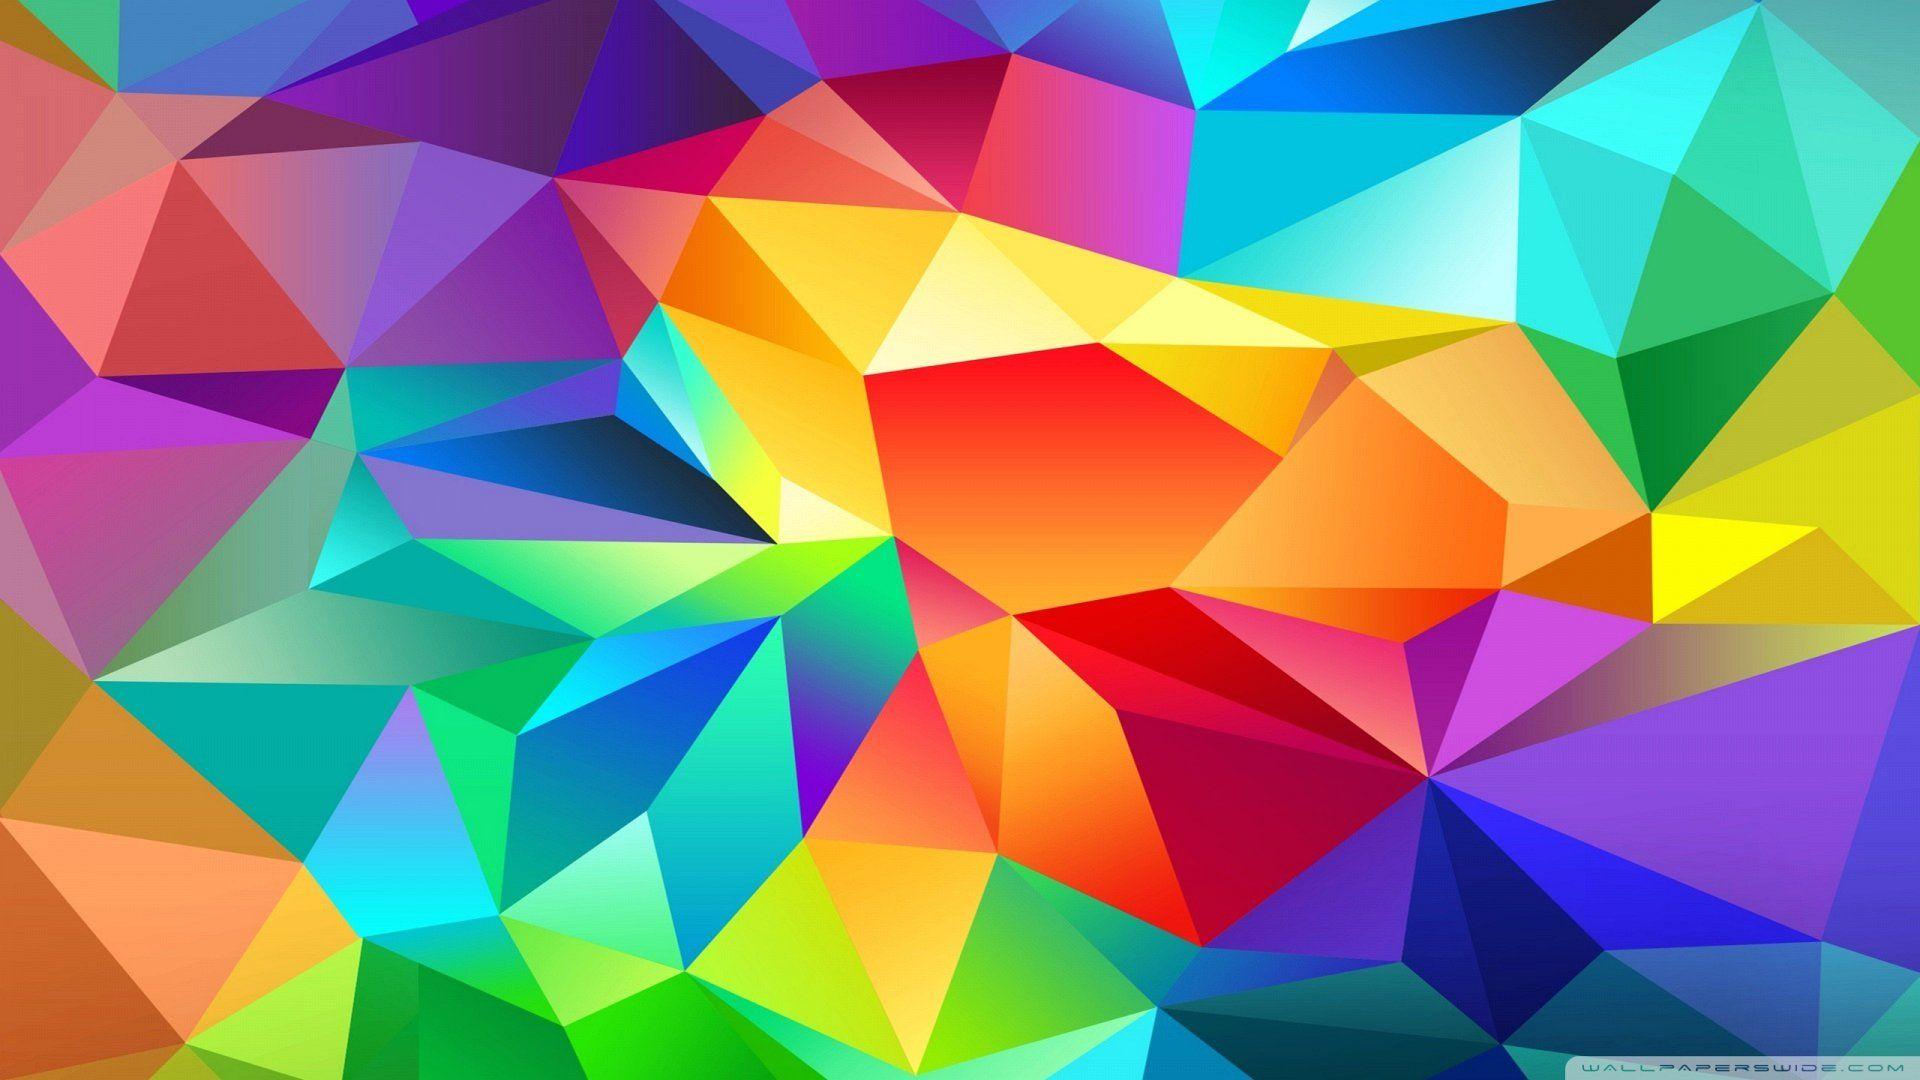 Wallpaper Polygonal Colorful Abstract 1920 X 1080 Full 1920